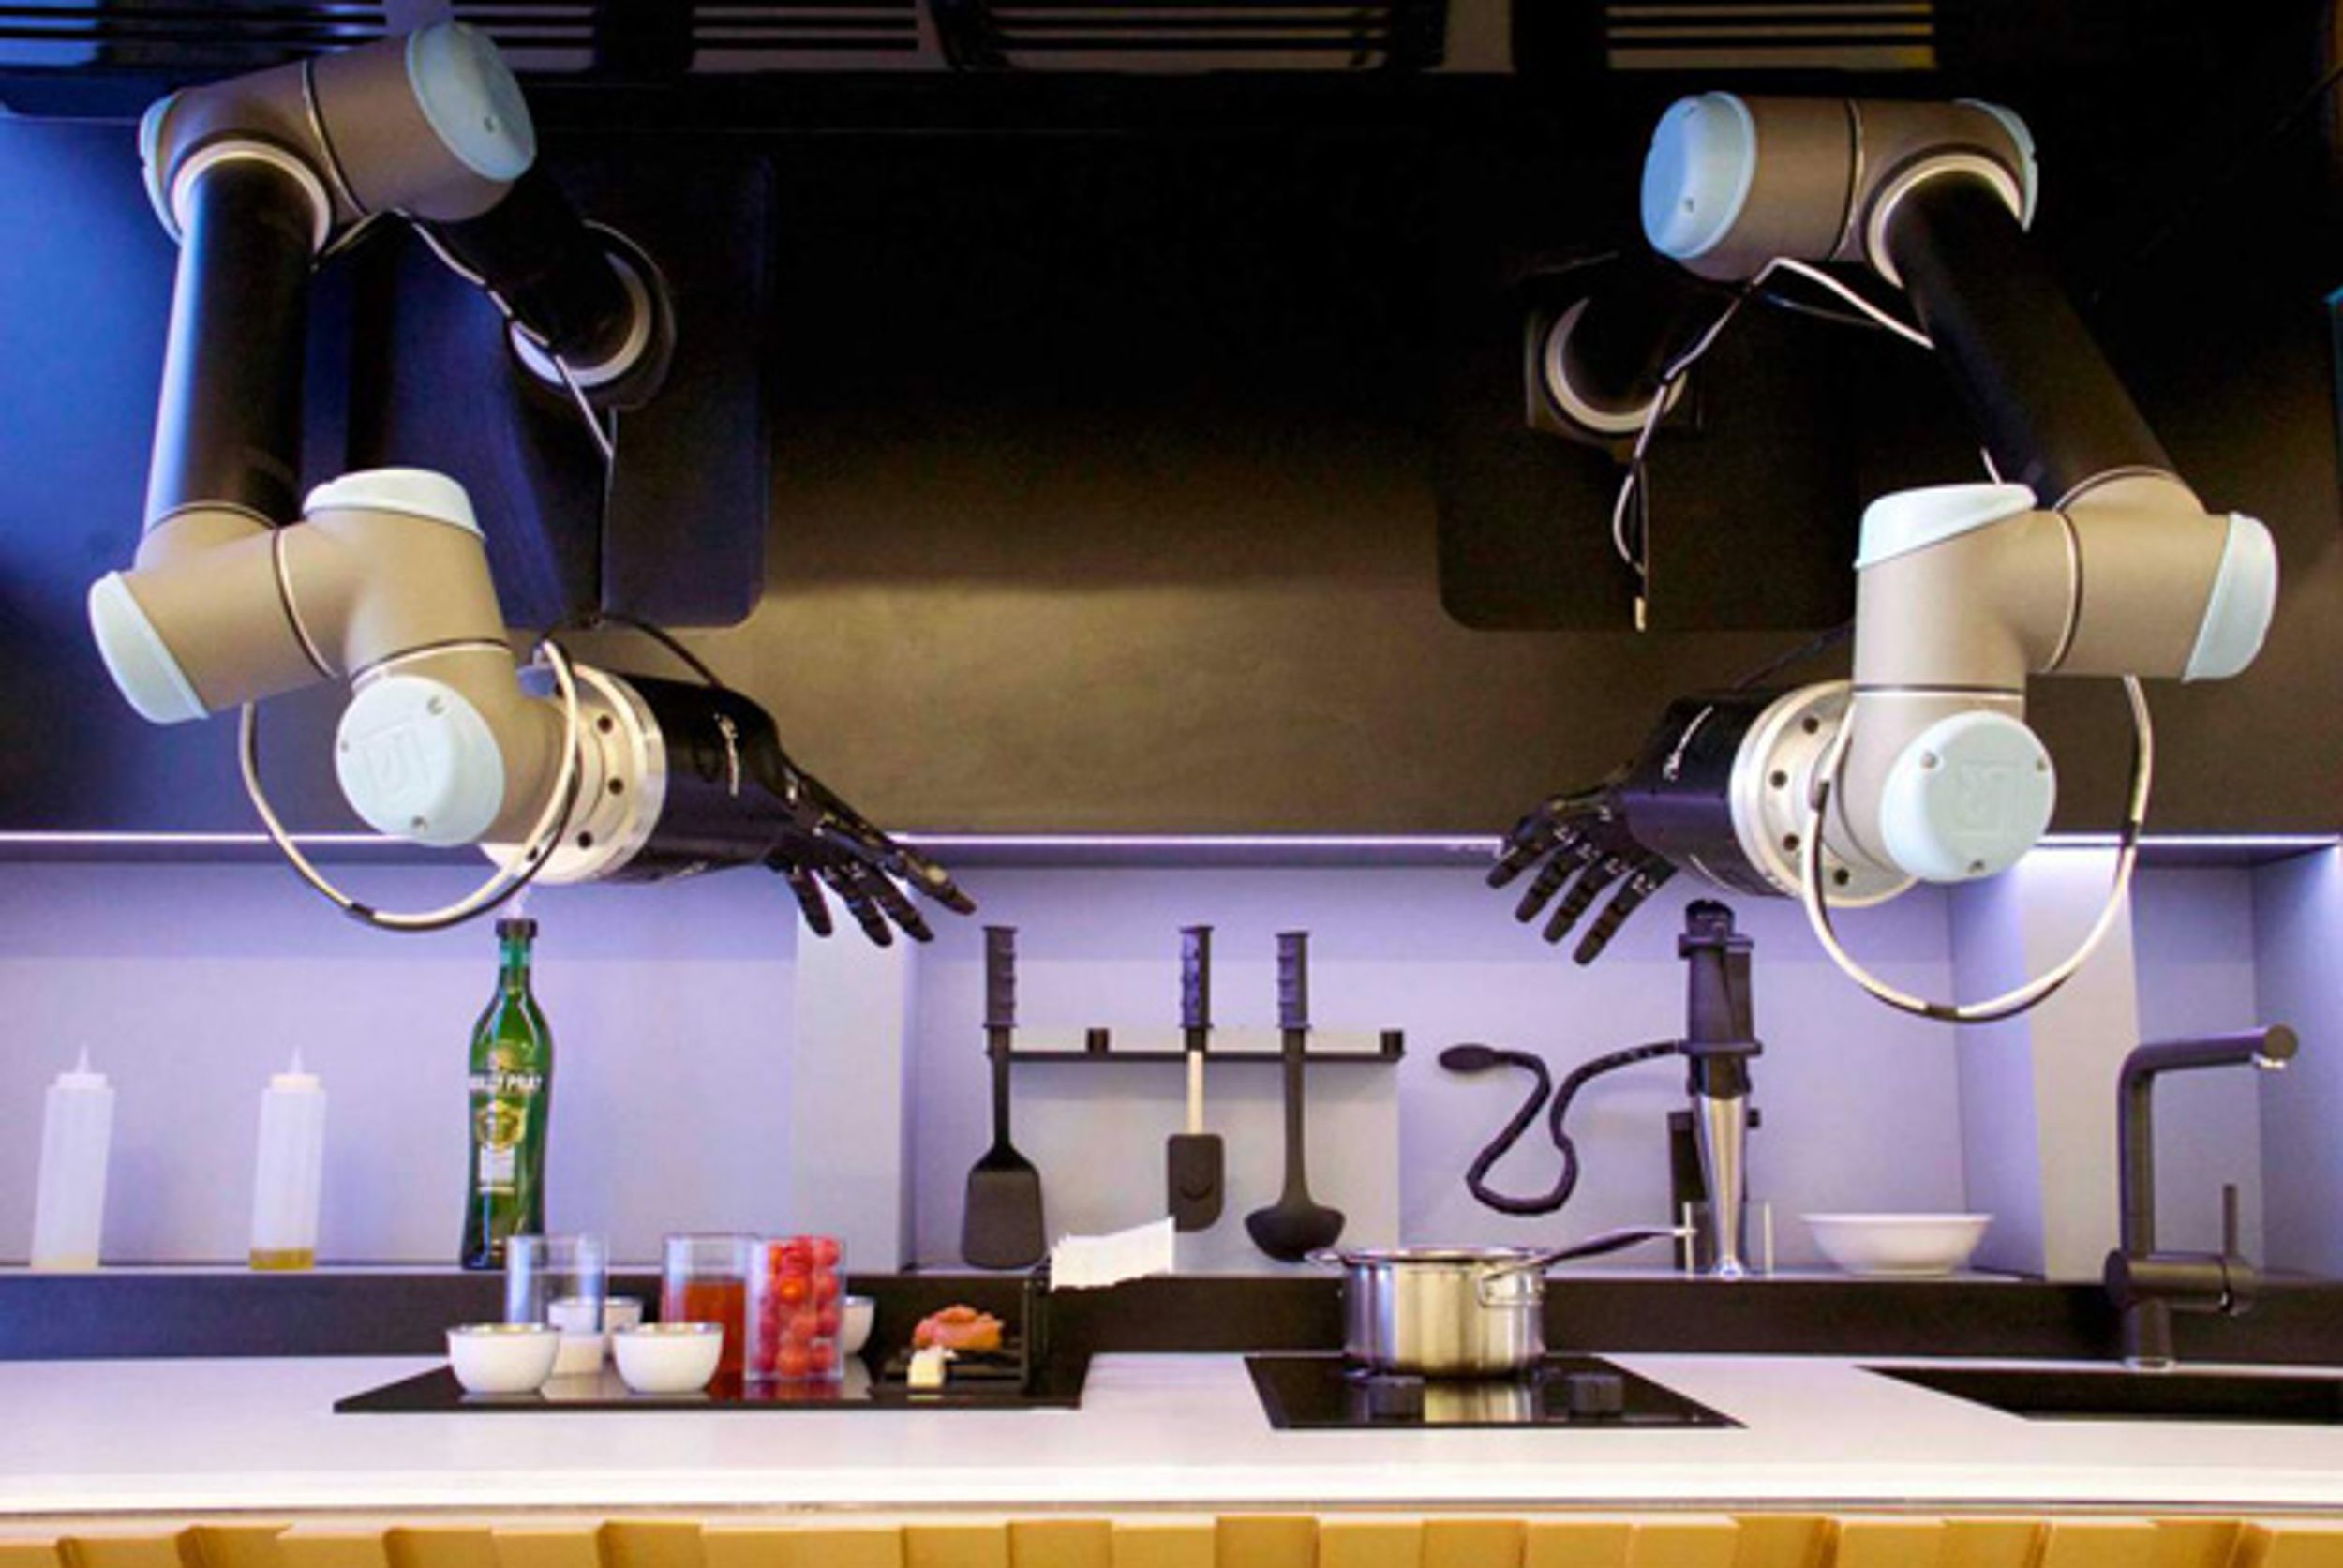 Video Friday: Robotic Kitchen, Swarming Drones, and Robots Want Your Blood